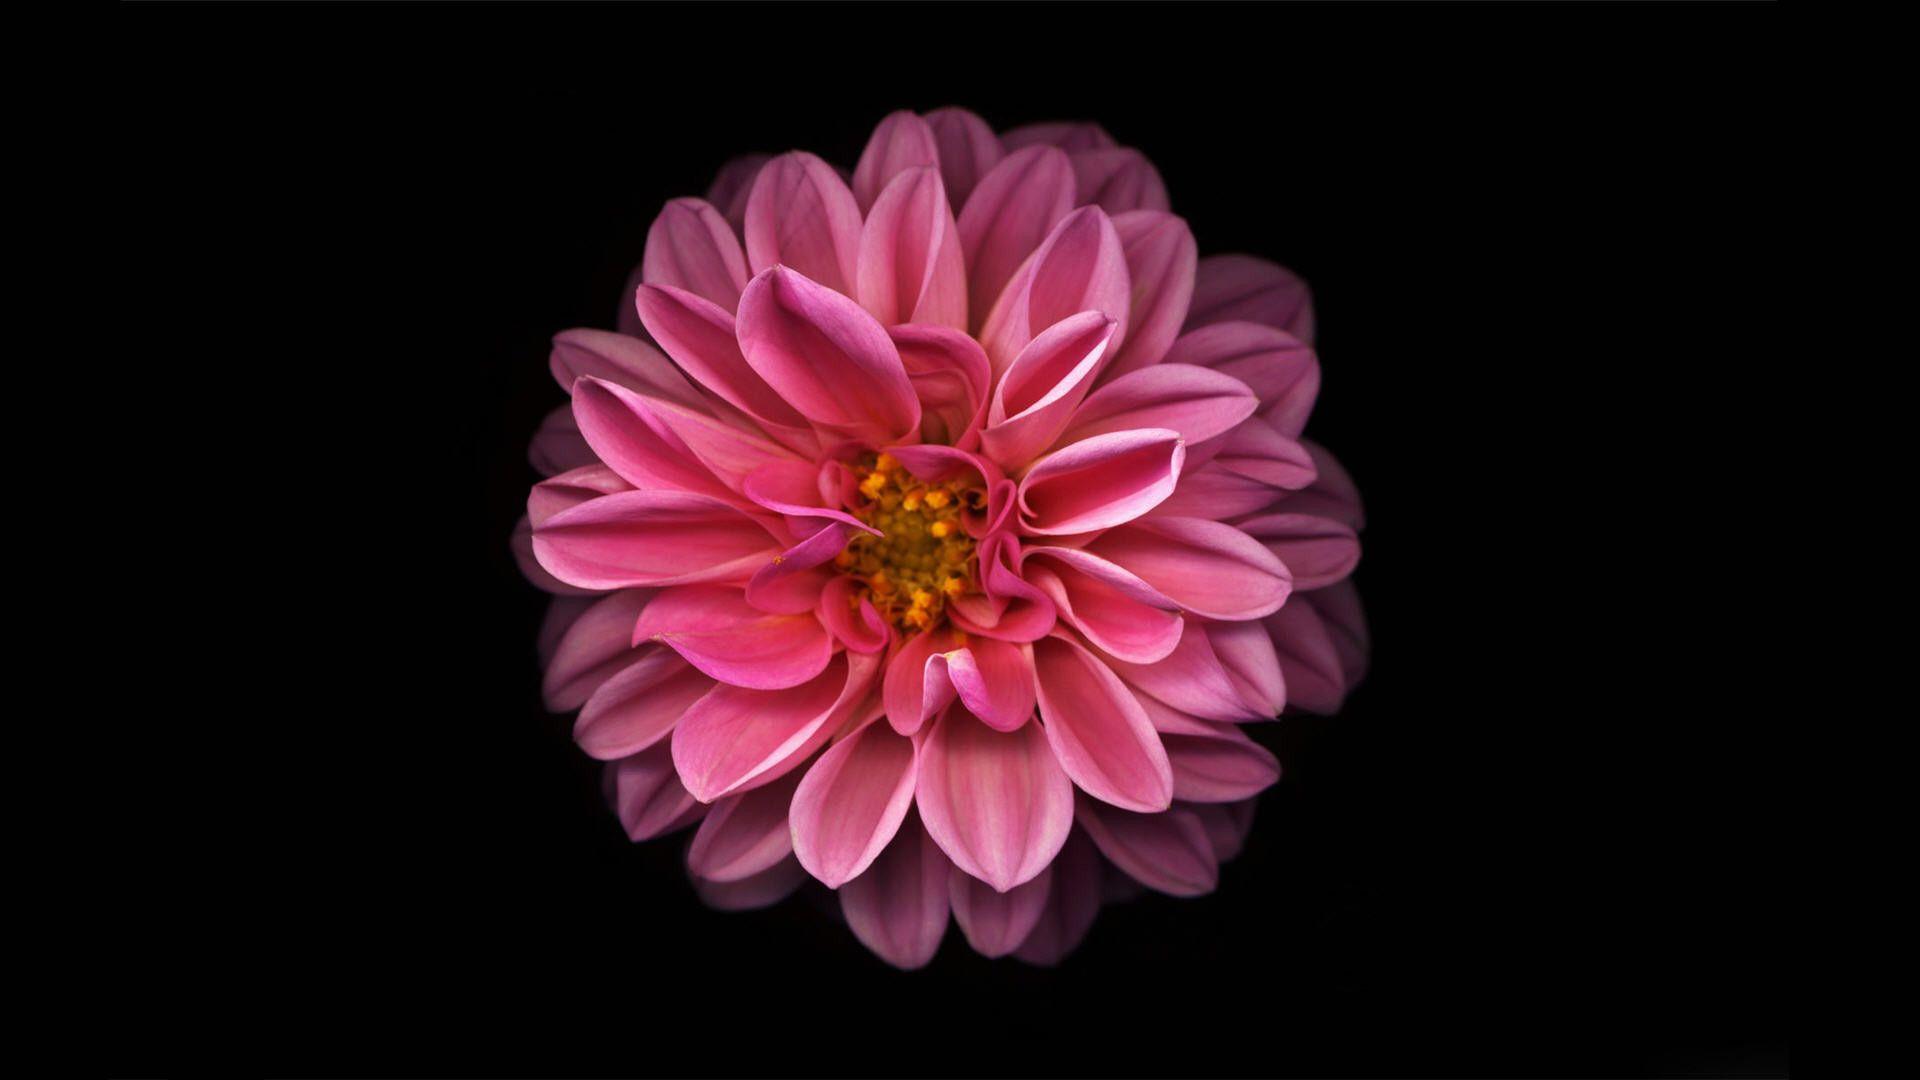 Black and Pink Flower Wallpapers - Top Free Black and Pink Flower ...